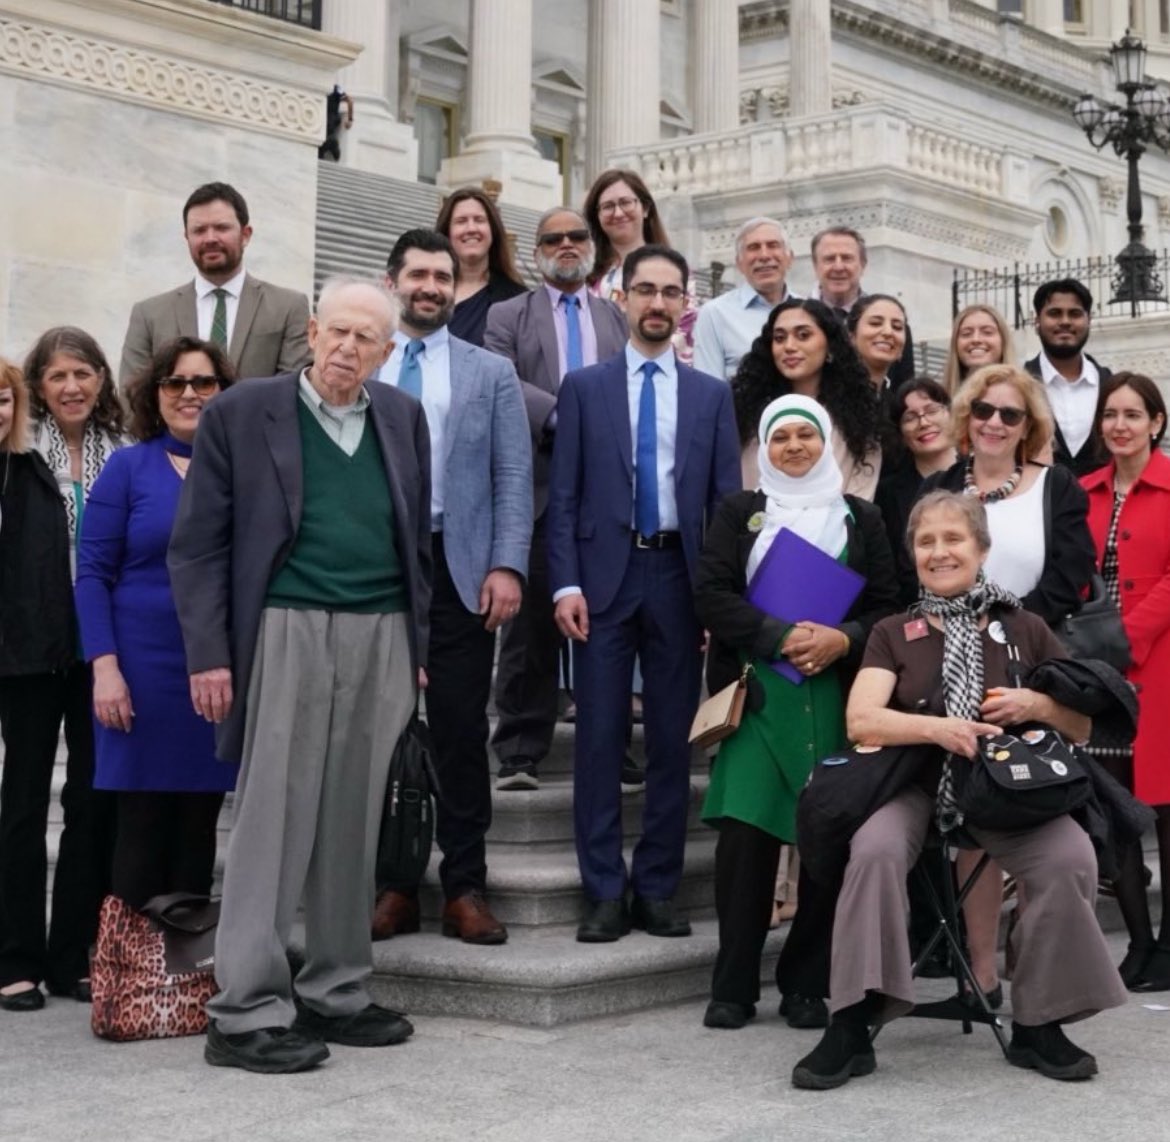 Can’t stop laughing at NIAC’s representation of Iranians on Capitol Hill.